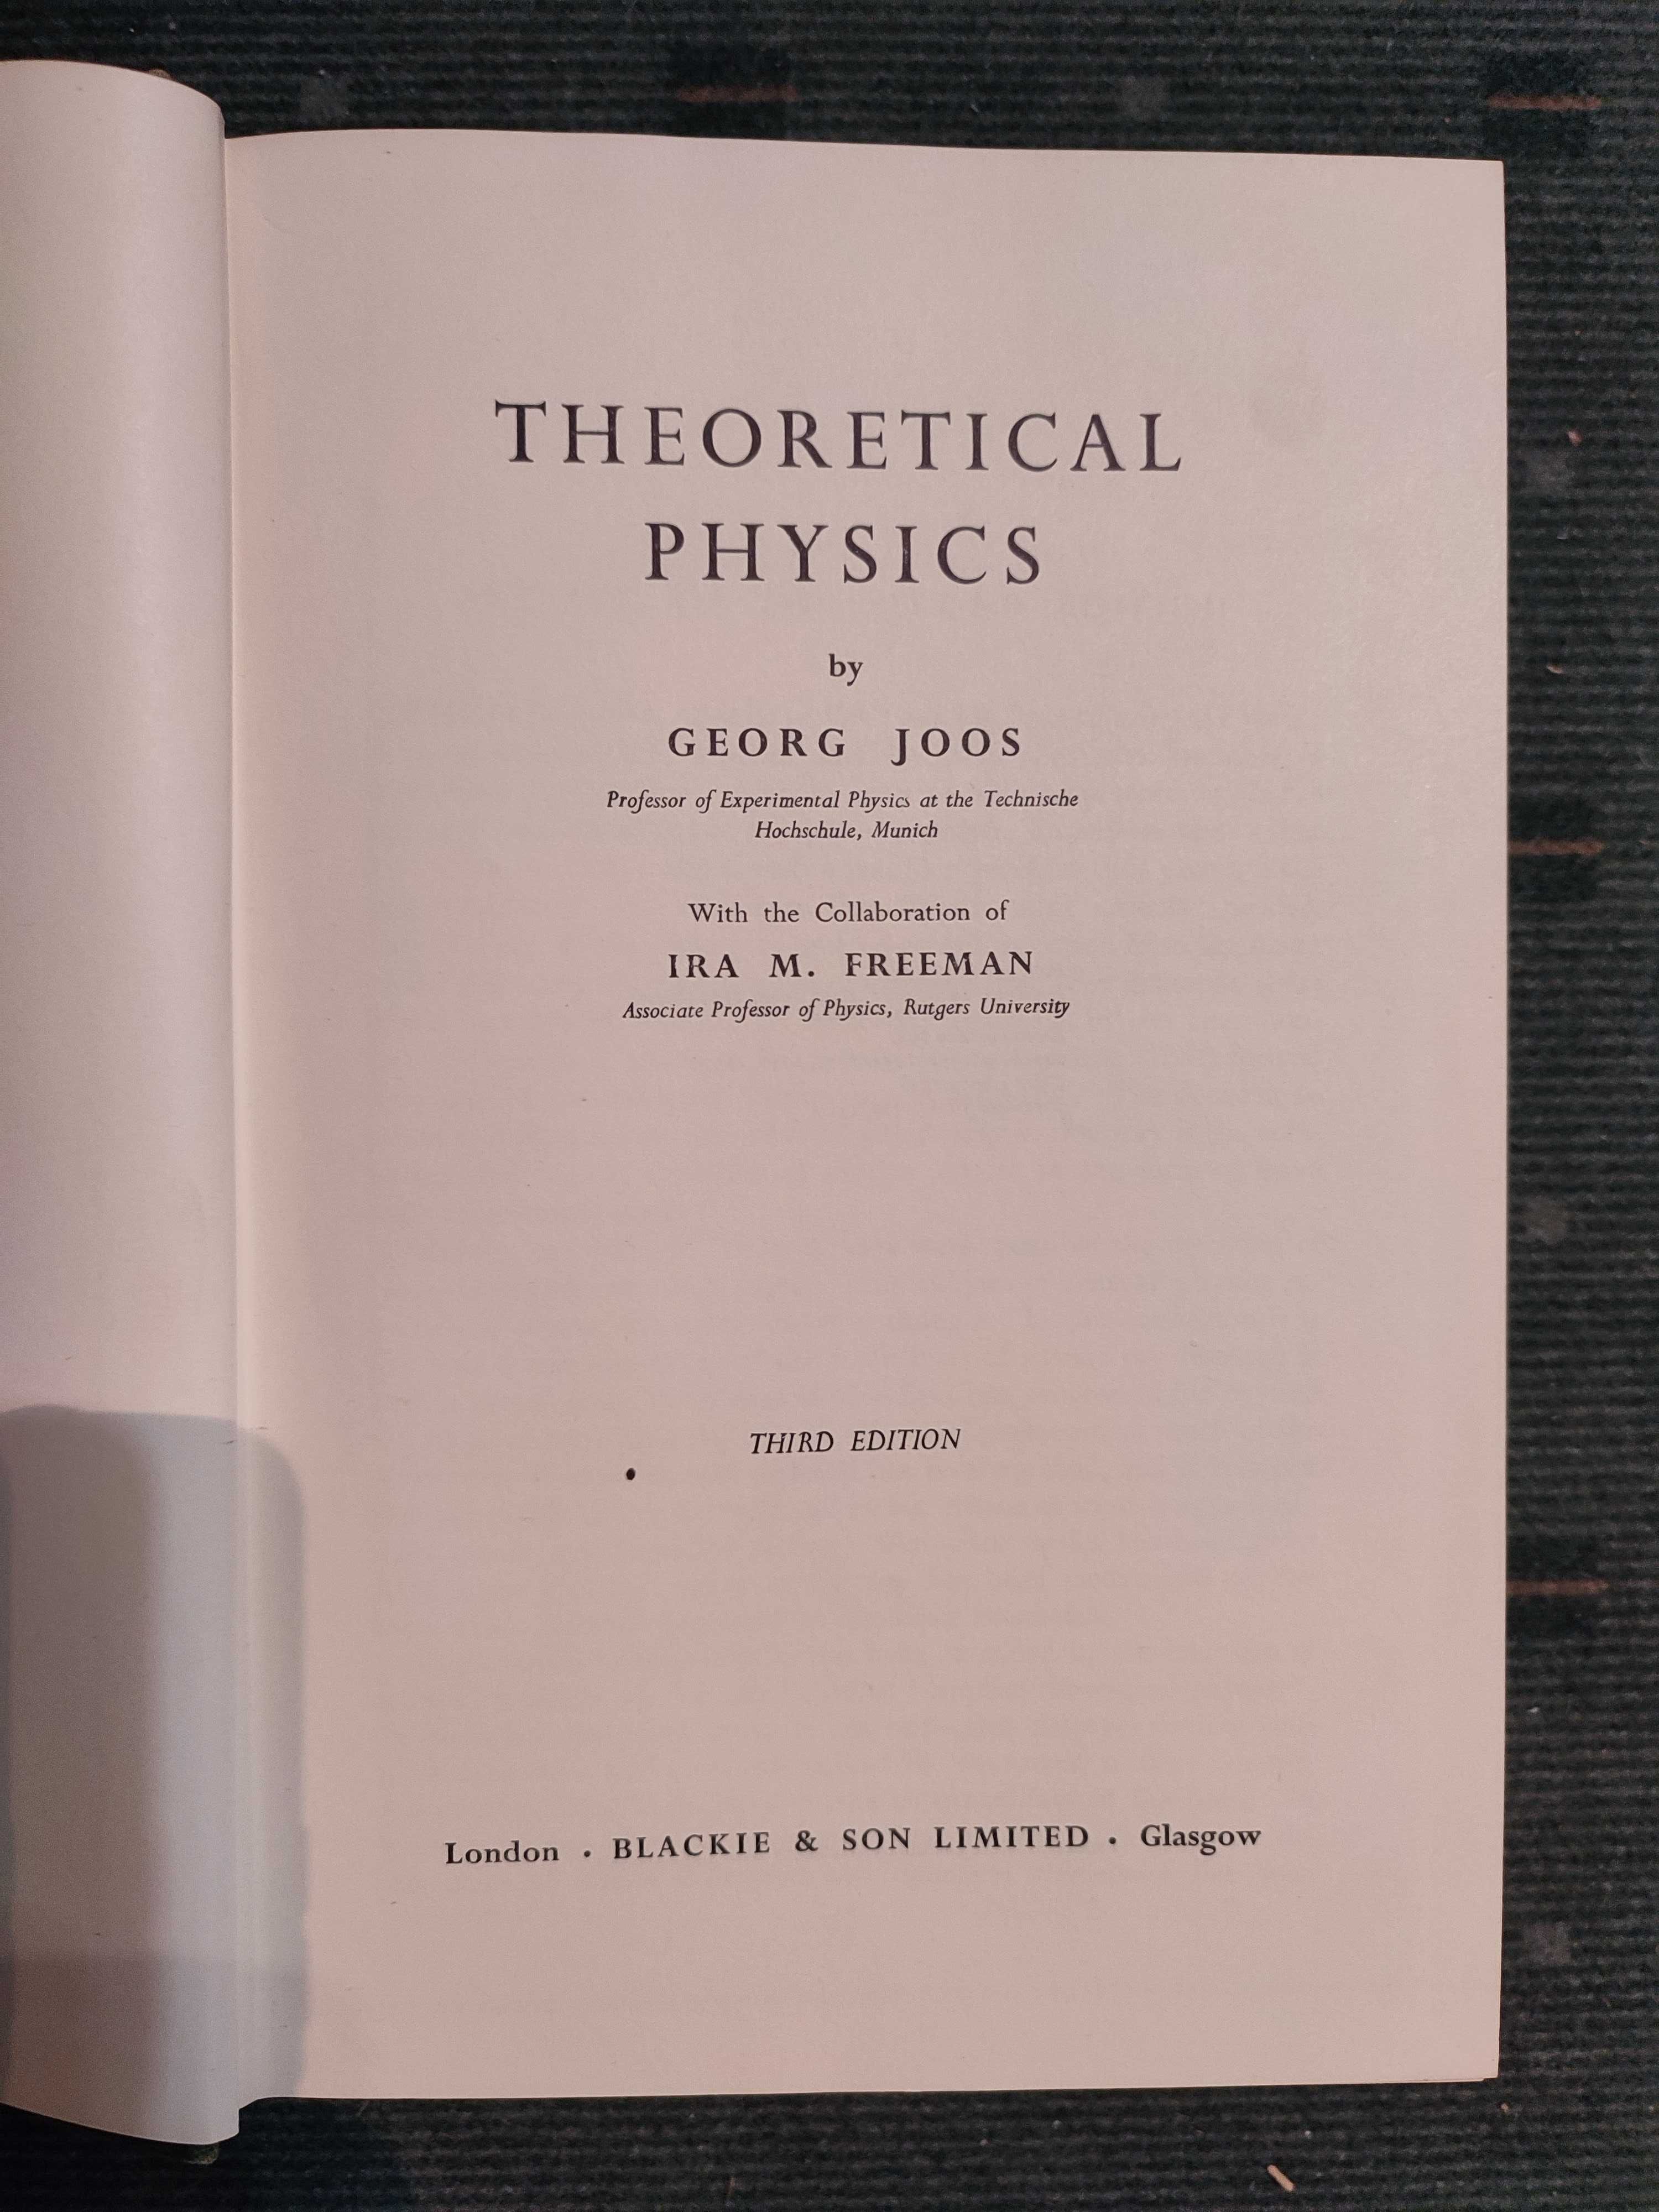 Theoretical Phisics by Georg Joos